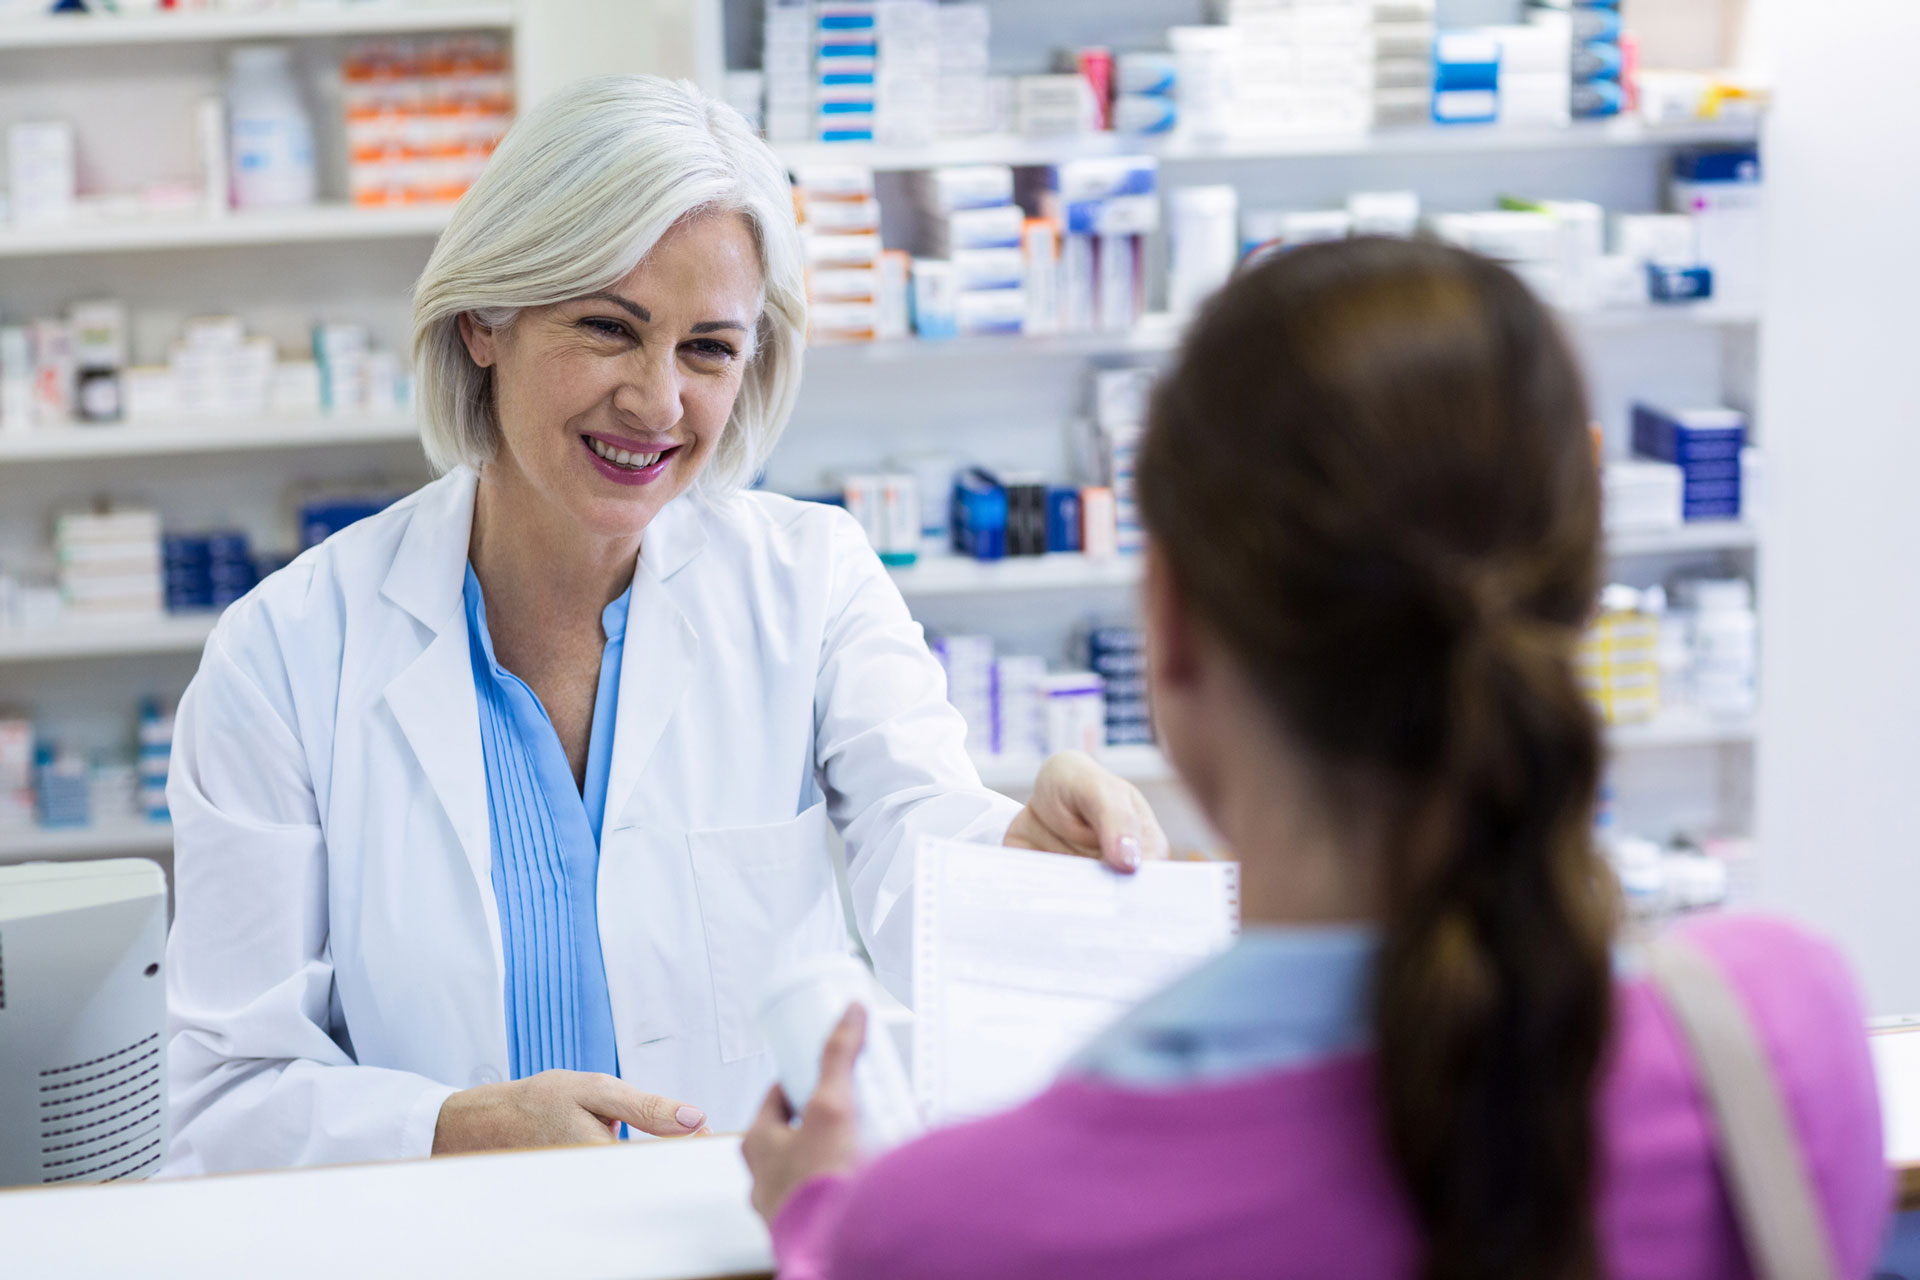 Pharmacists: Do You Know Your Rights to Refuse?